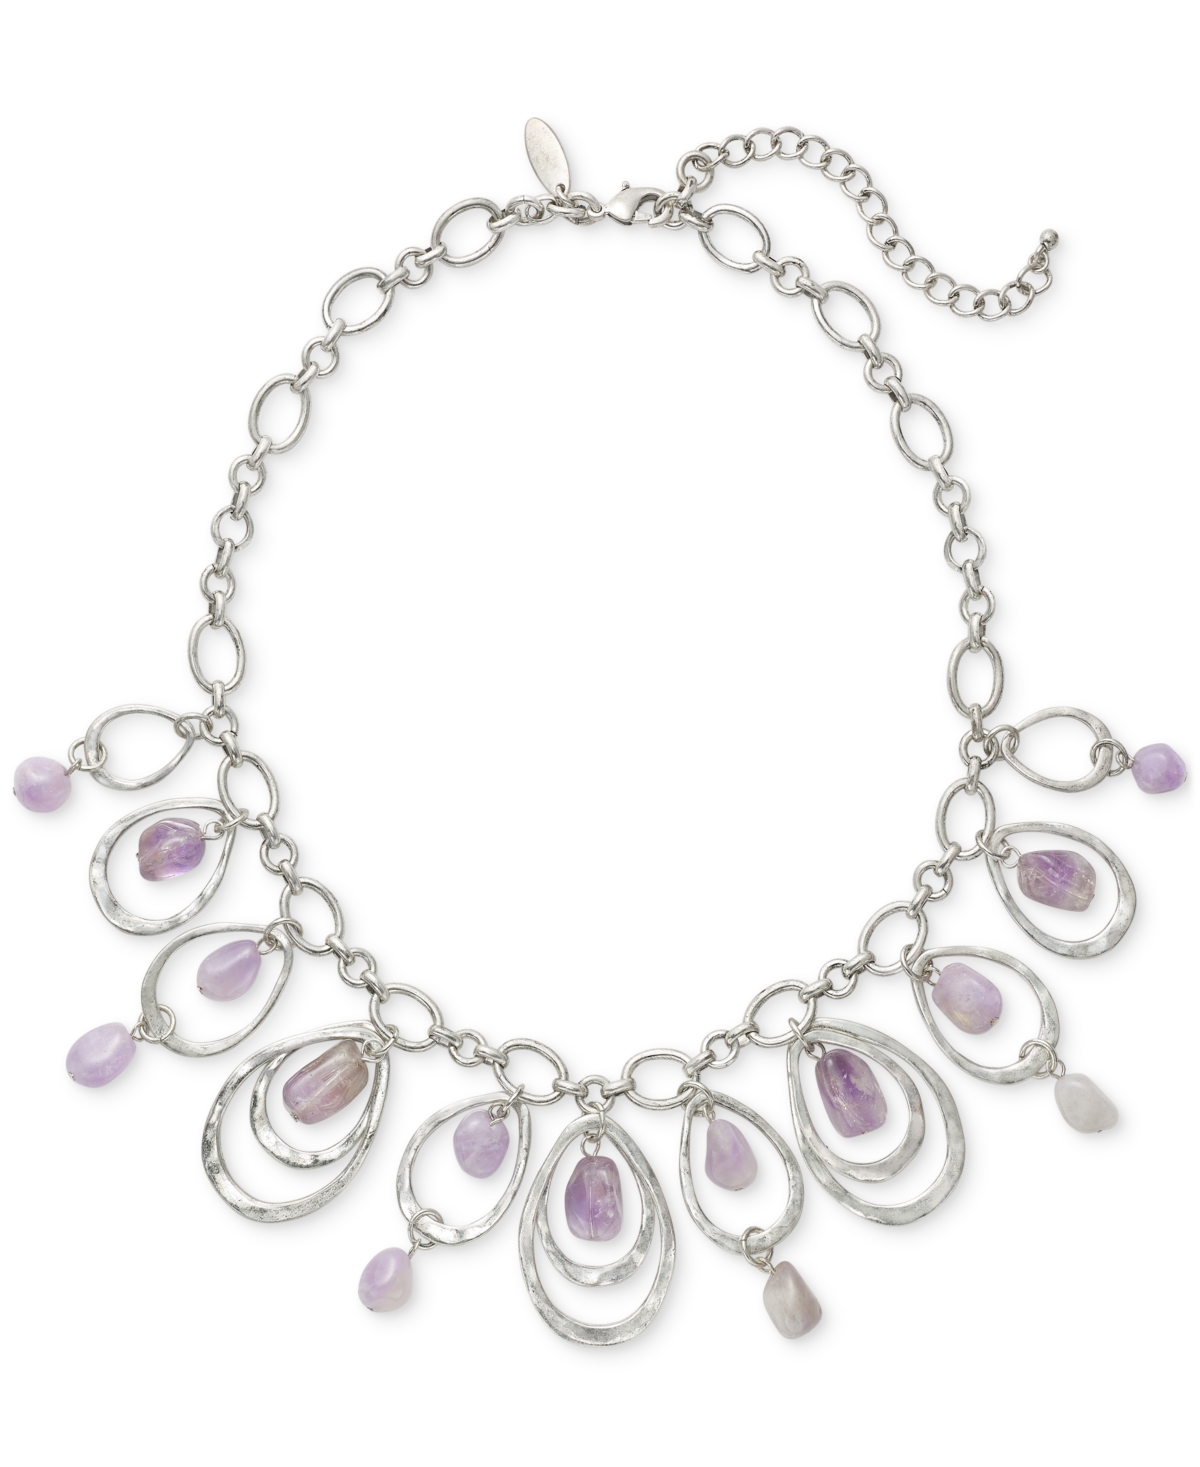 Orbital Bead Statement Necklace, 18-1/4" + 3" extender, Created for Macy's - Purple